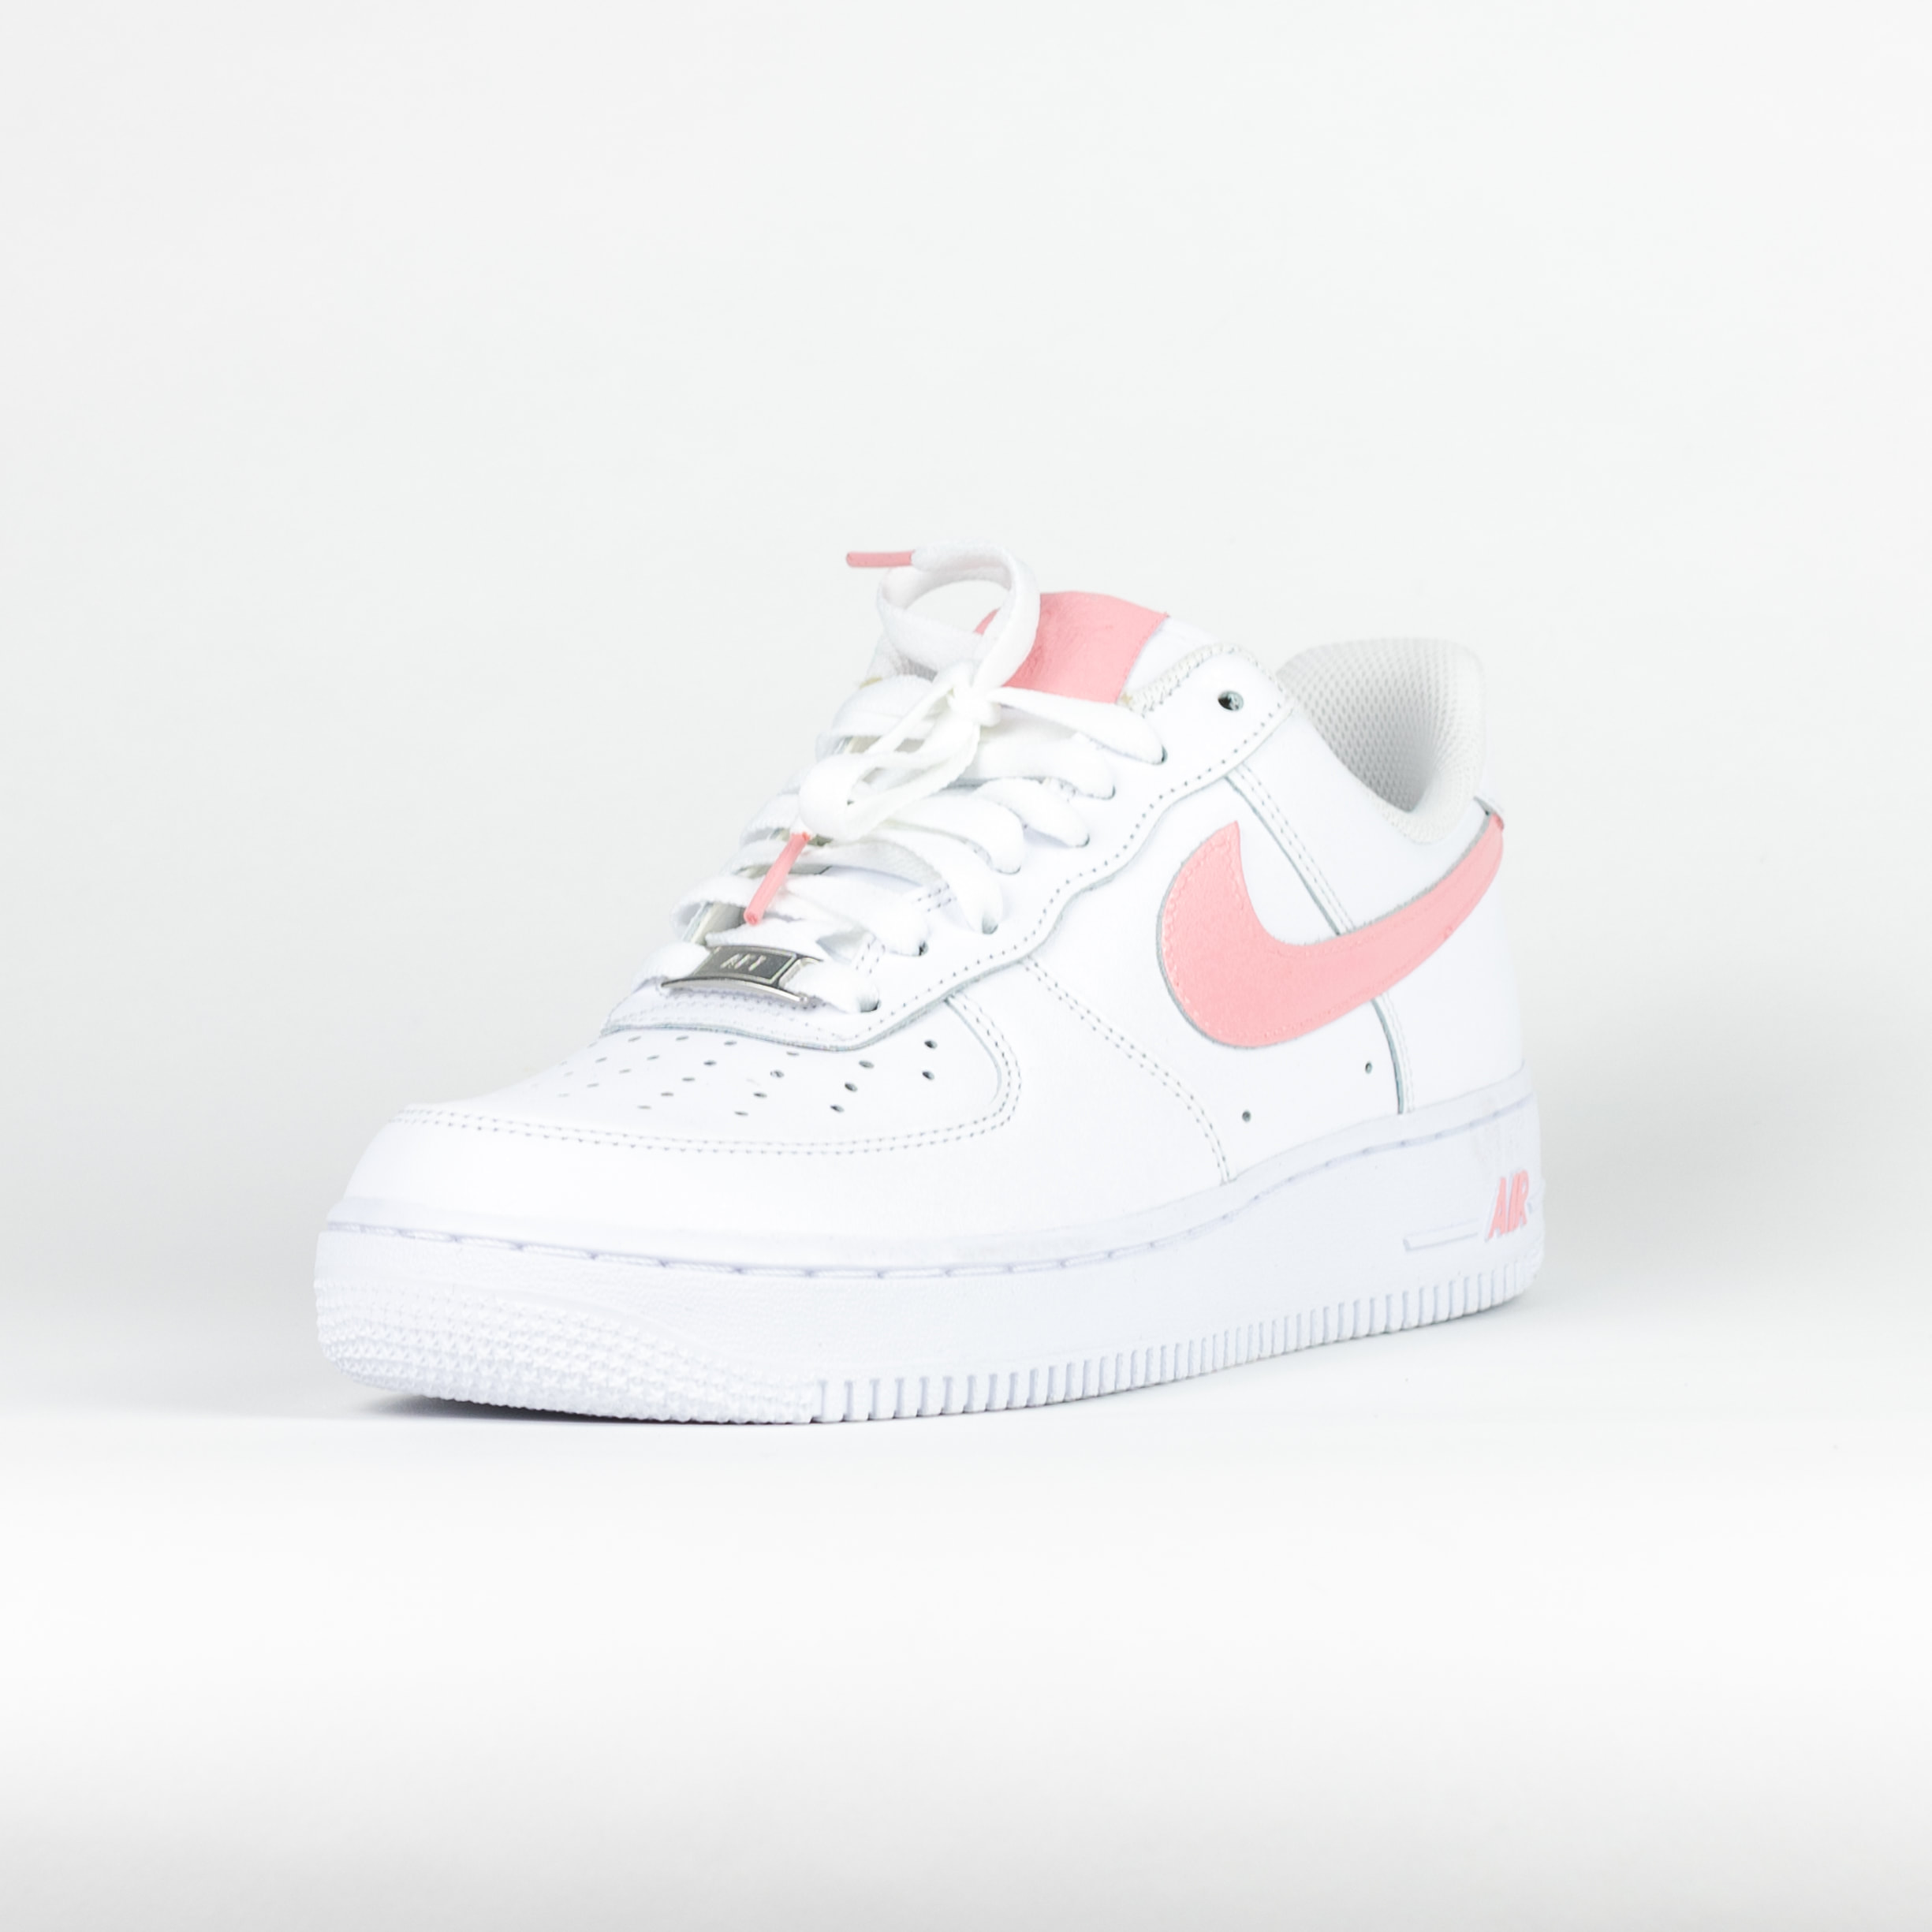 air force 1s pink and white